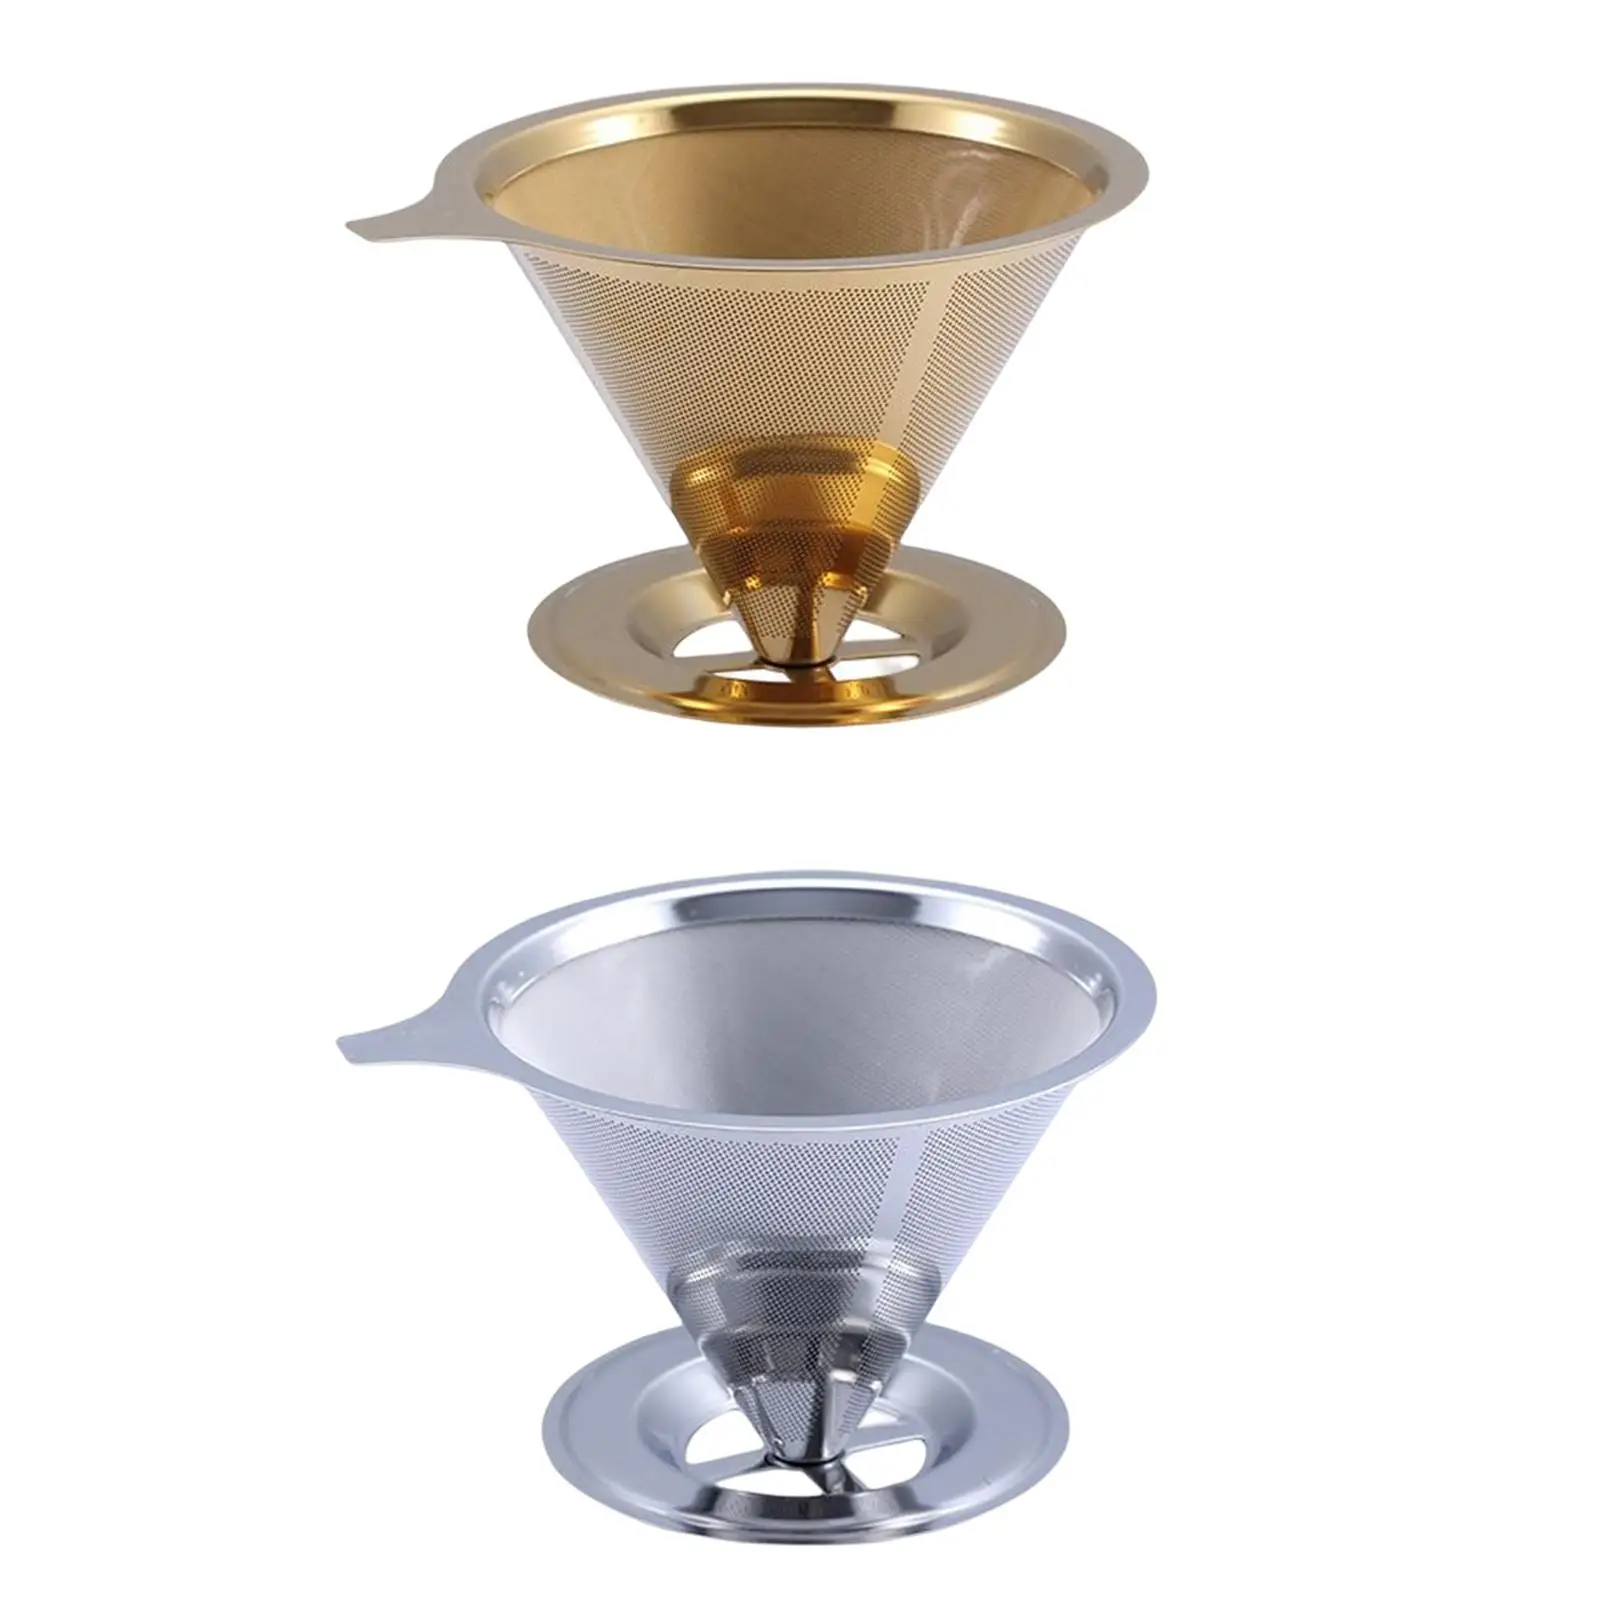 Coffee Filter, Reusable Coffee Dripper, Stainless Steel Drip Coffee Filters,